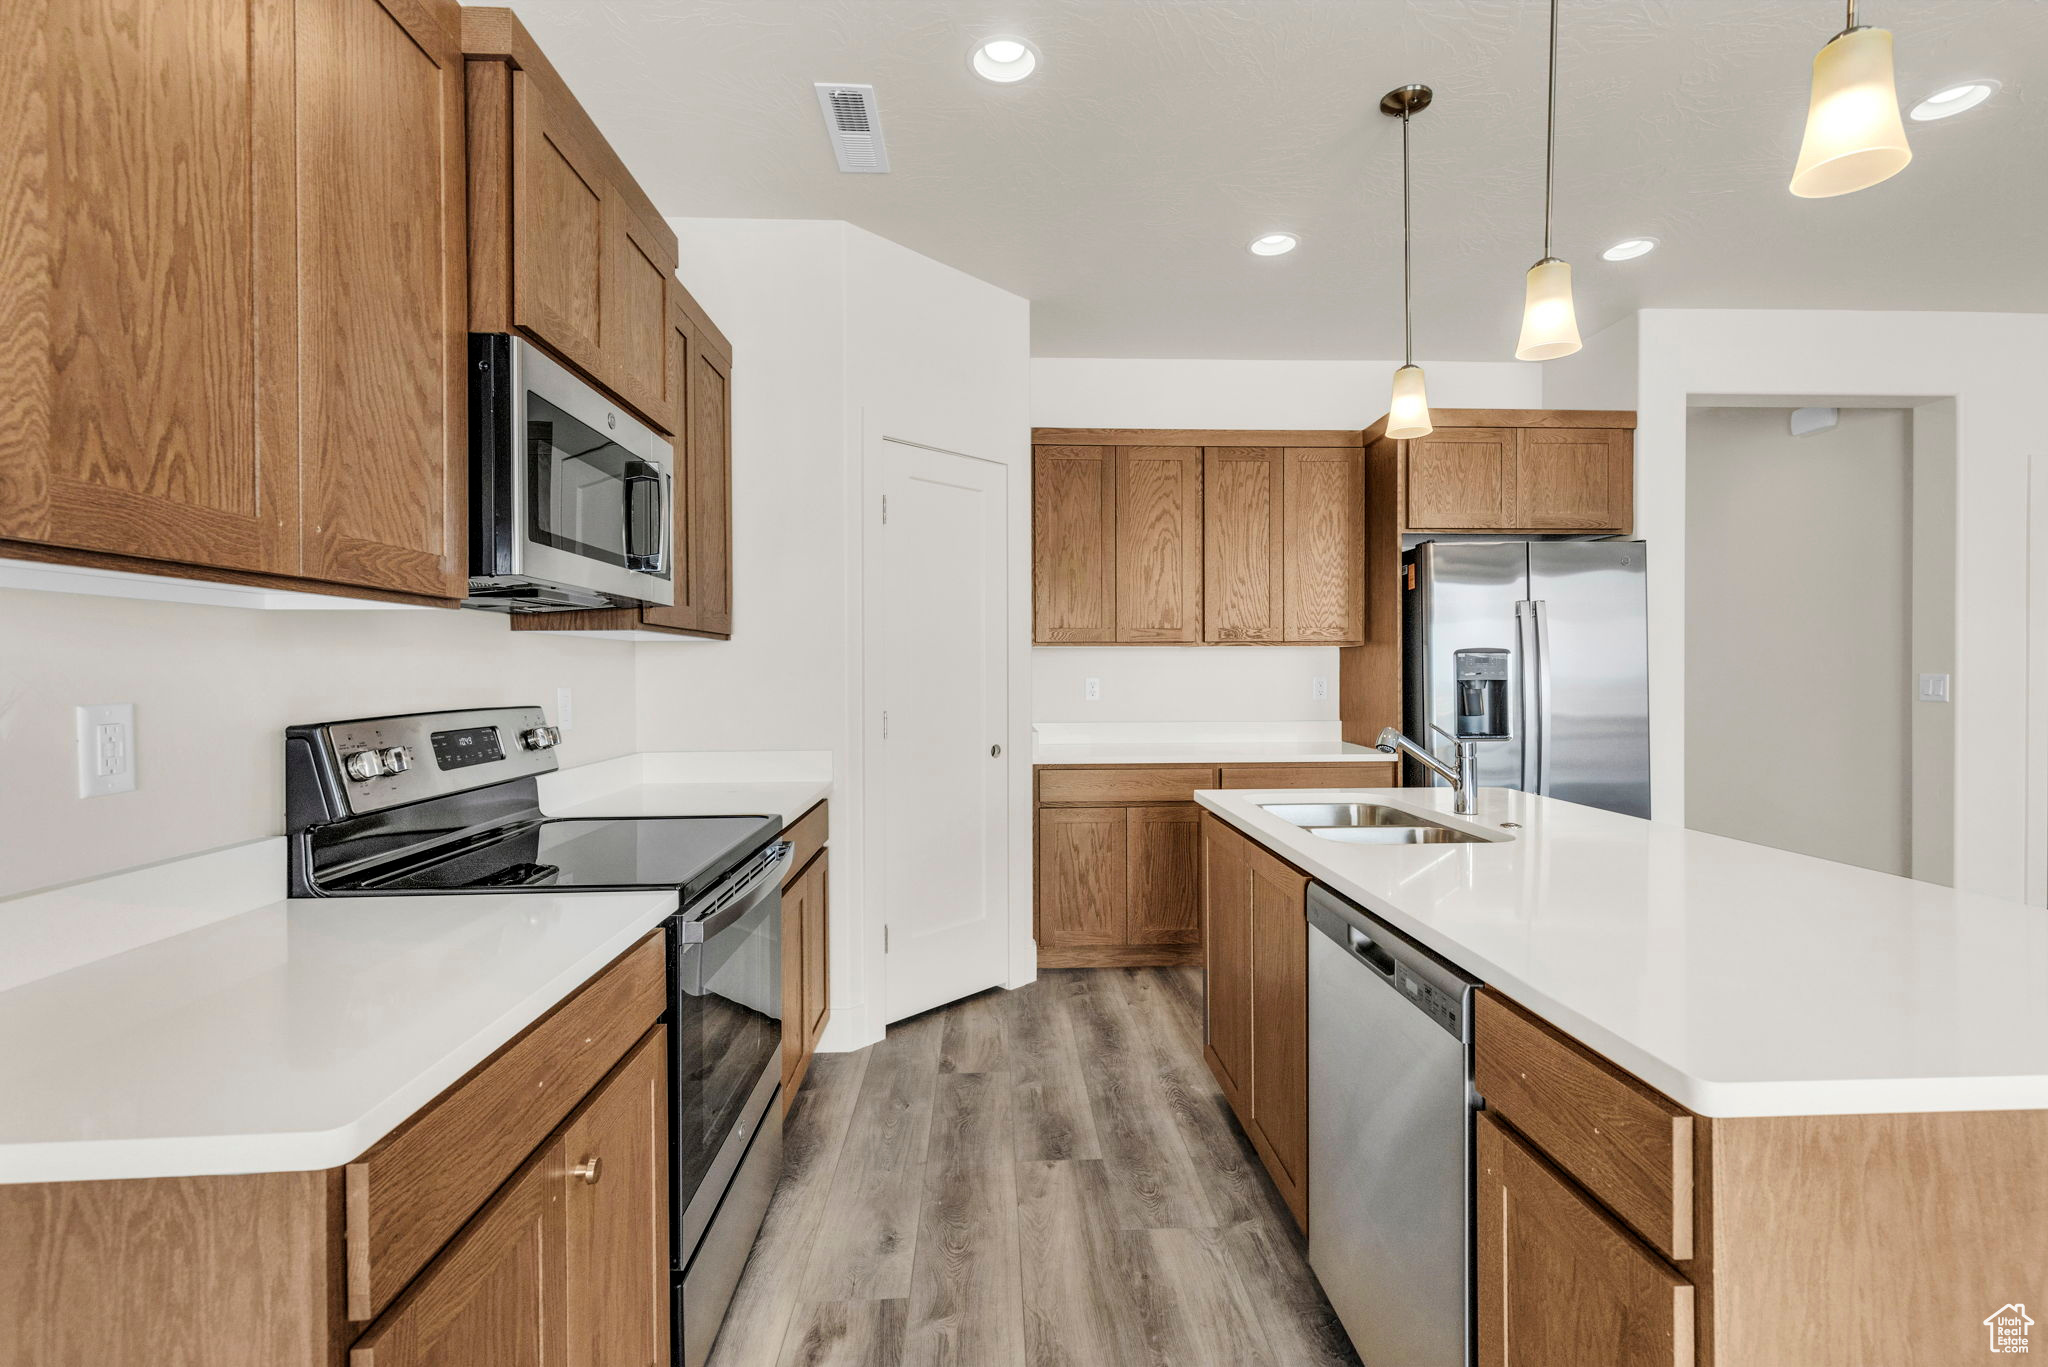 Kitchen featuring light hardwood / wood-style flooring, a kitchen island with sink, sink, decorative light fixtures, and appliances with stainless steel finishes